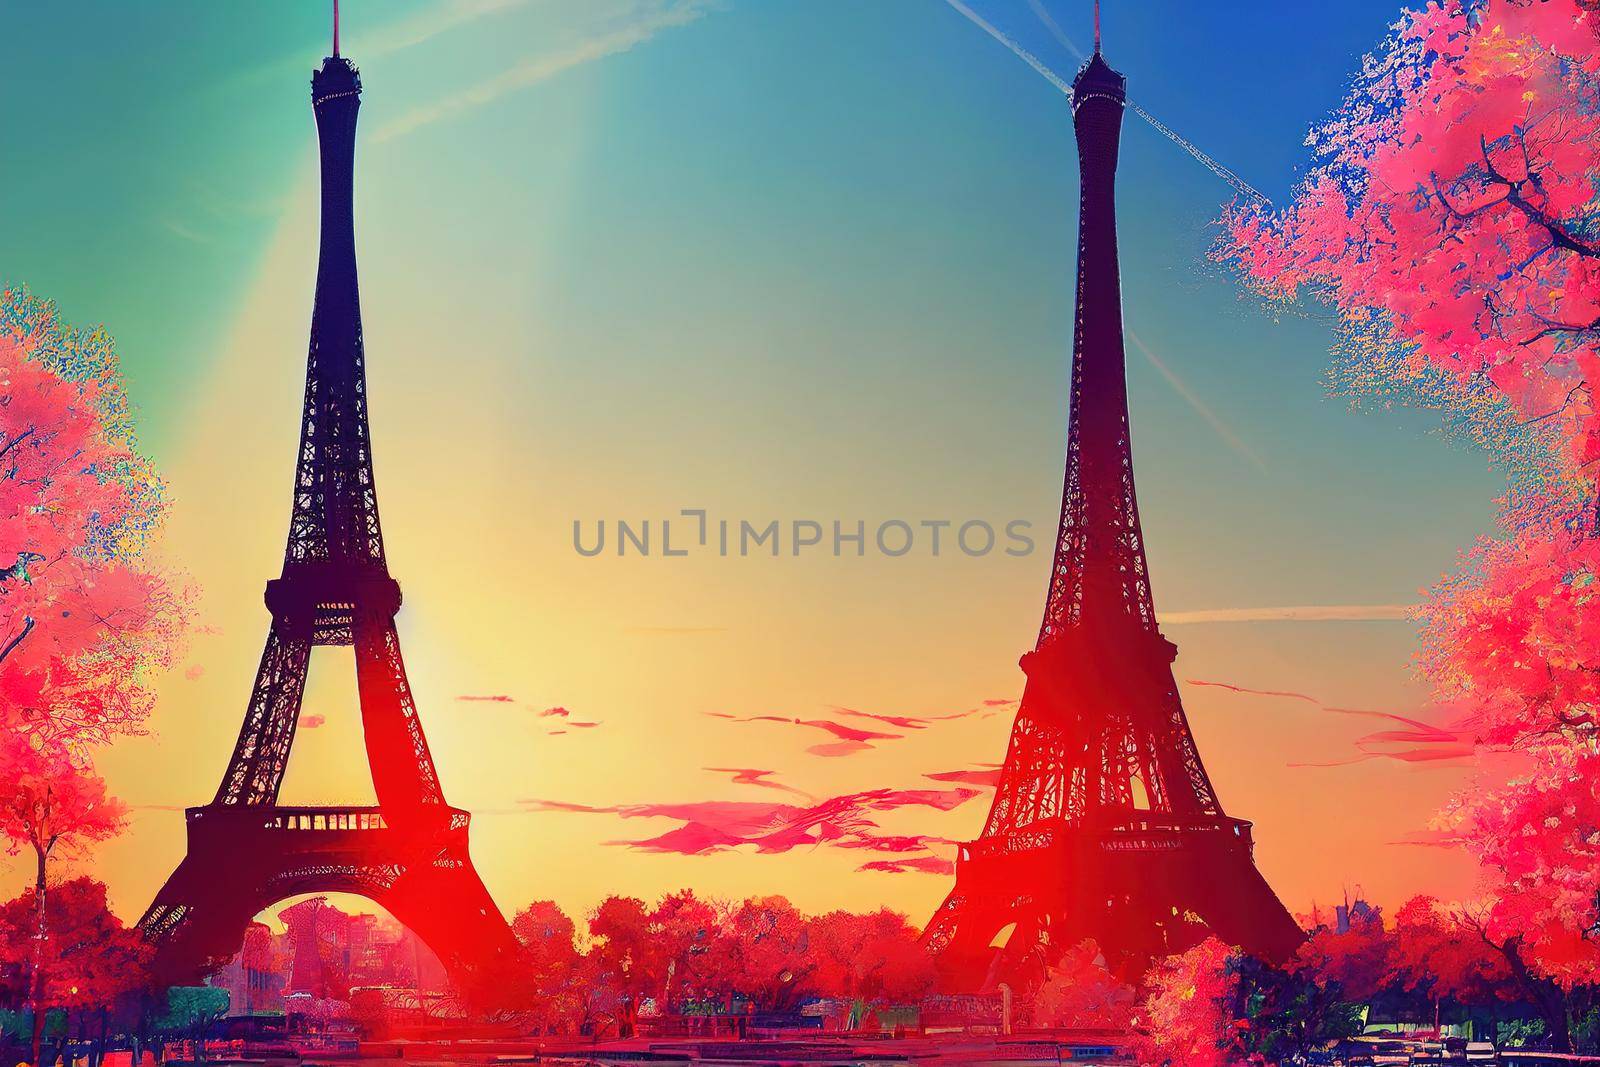 anime style, Eiffel Tower with spring trees against sunrise by 2ragon